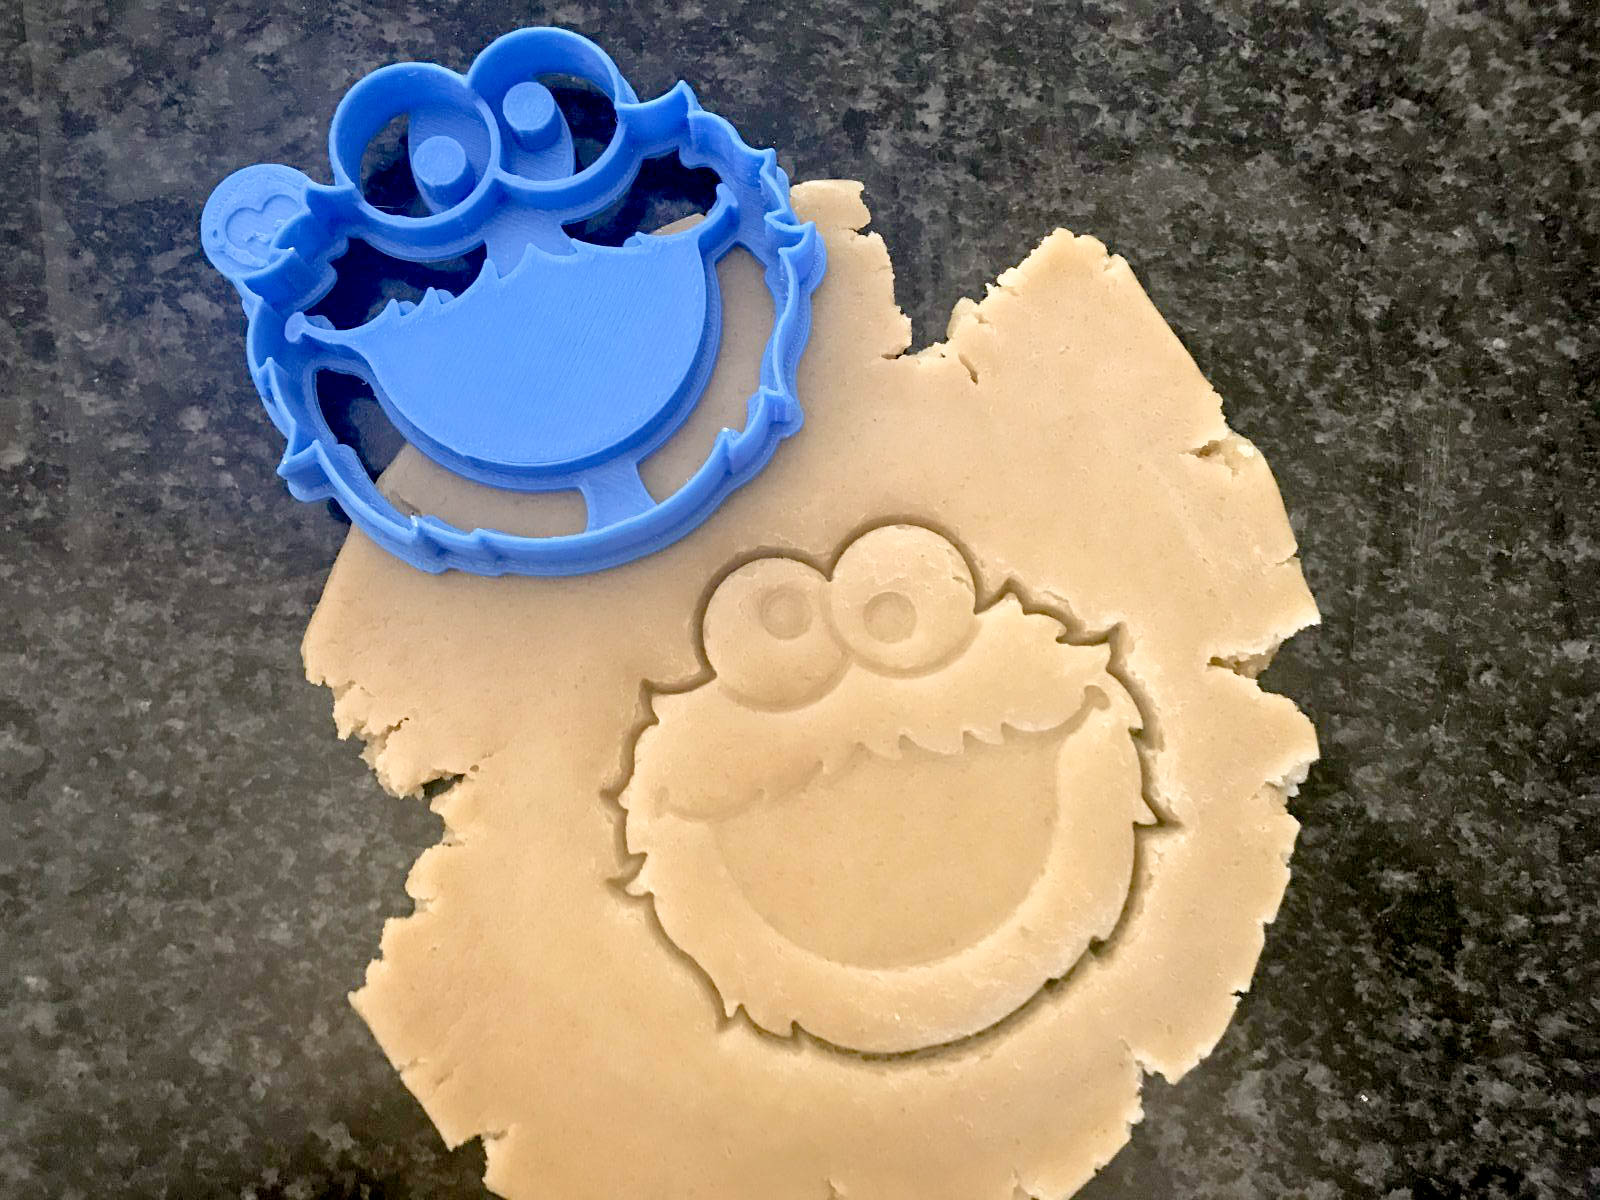 Cookie Monster Cookie Cutter